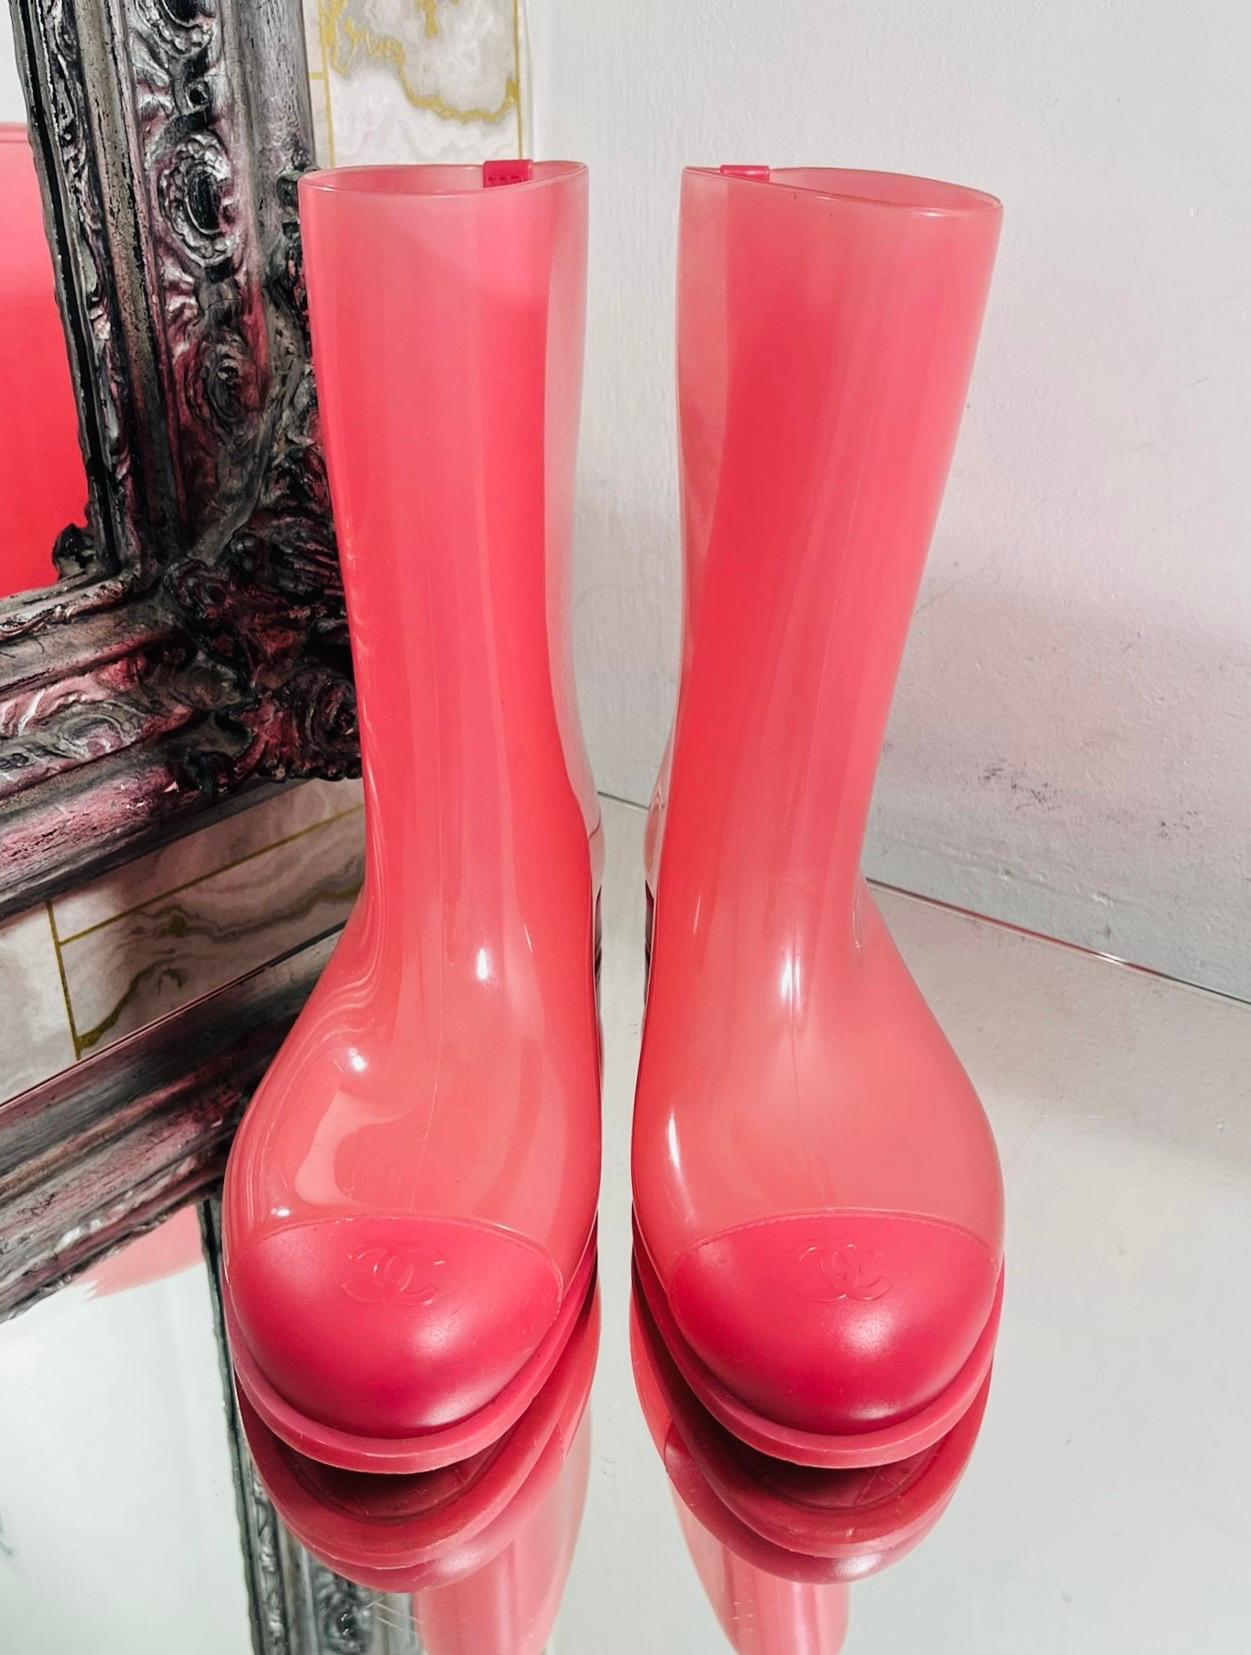 Rare Piece - Chanel 'CC' Logo Wellington Boots

Pink/watermelon coloured rain boots designed with 'CC' logo to the cap toe.

Featuring short block heel and signature diamond quilting to the soles.

Size – 41

Condition – Very Good

Composition –